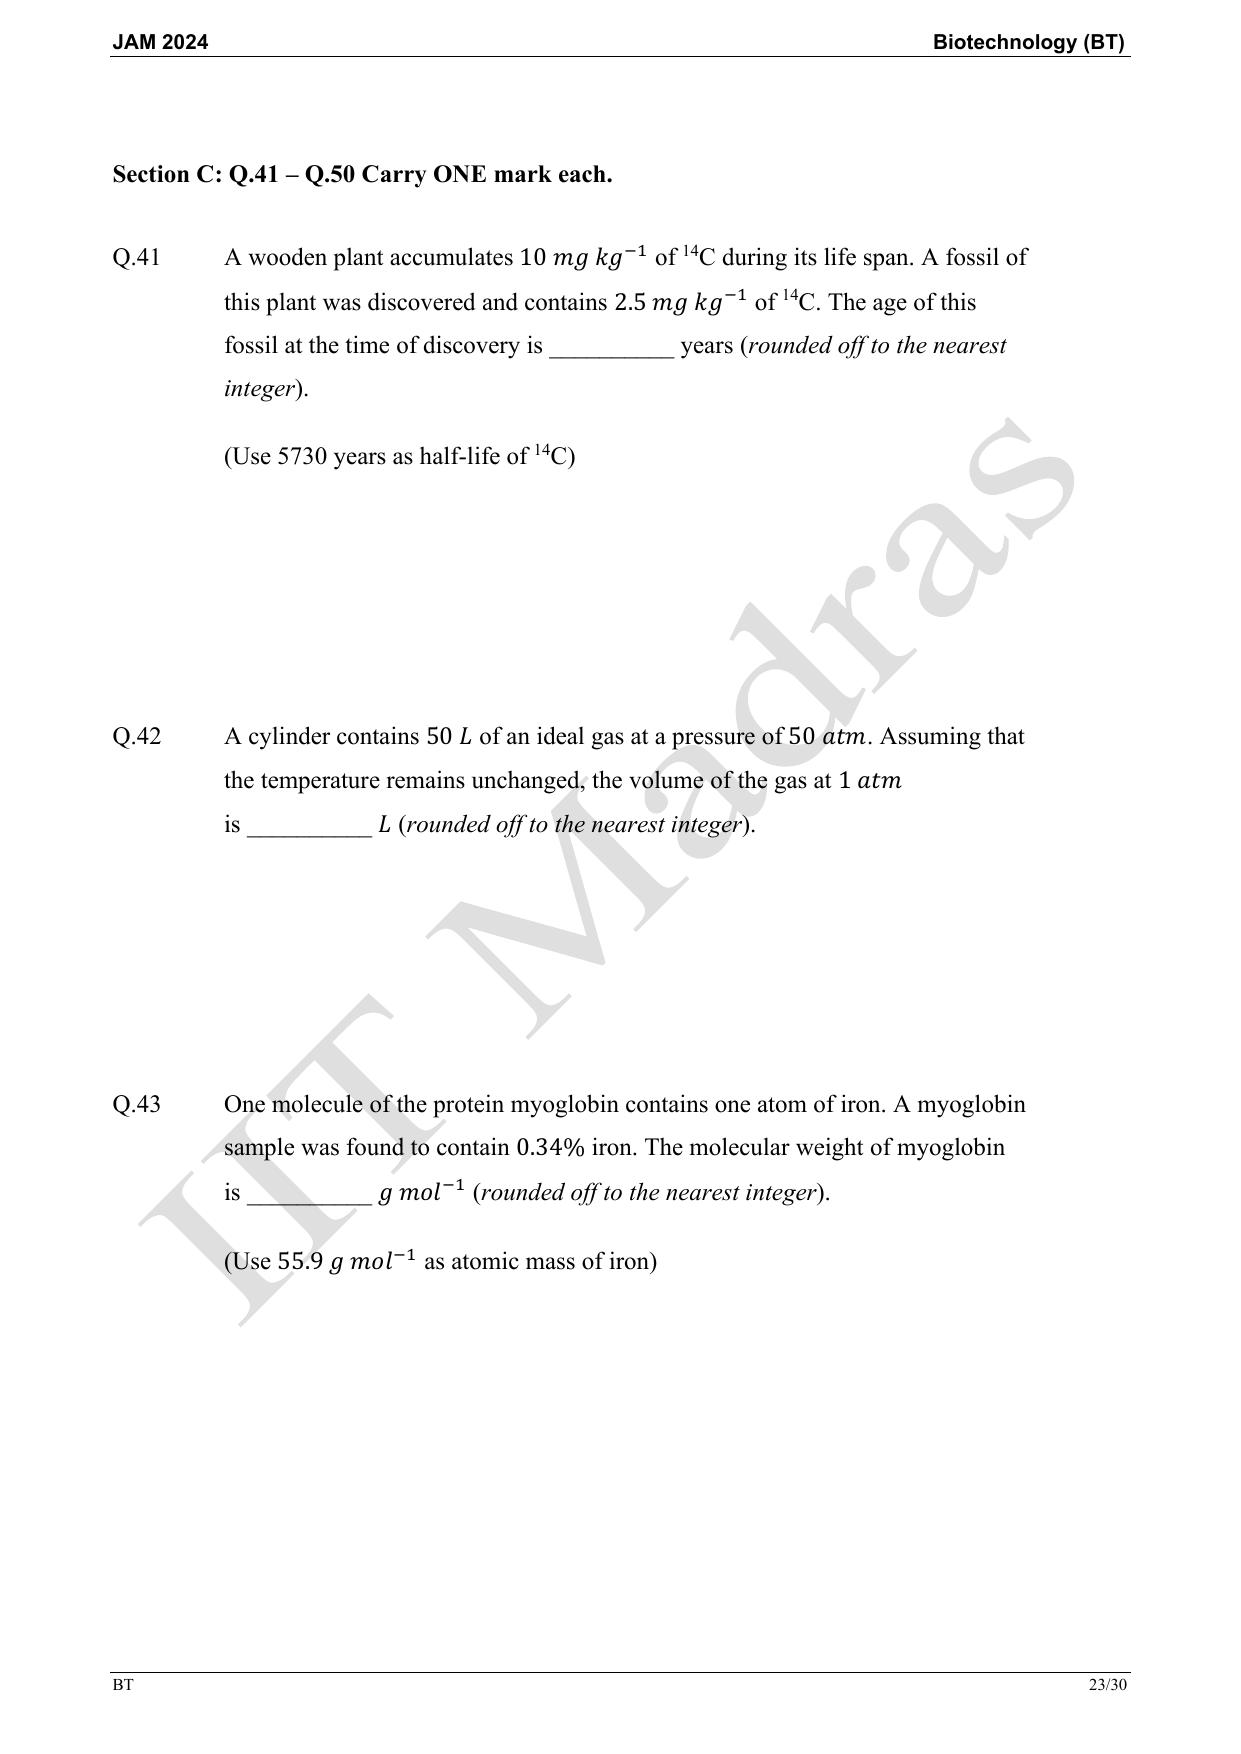 IIT JAM 2024 Biotechnology (BT) Master Question Paper - Page 23